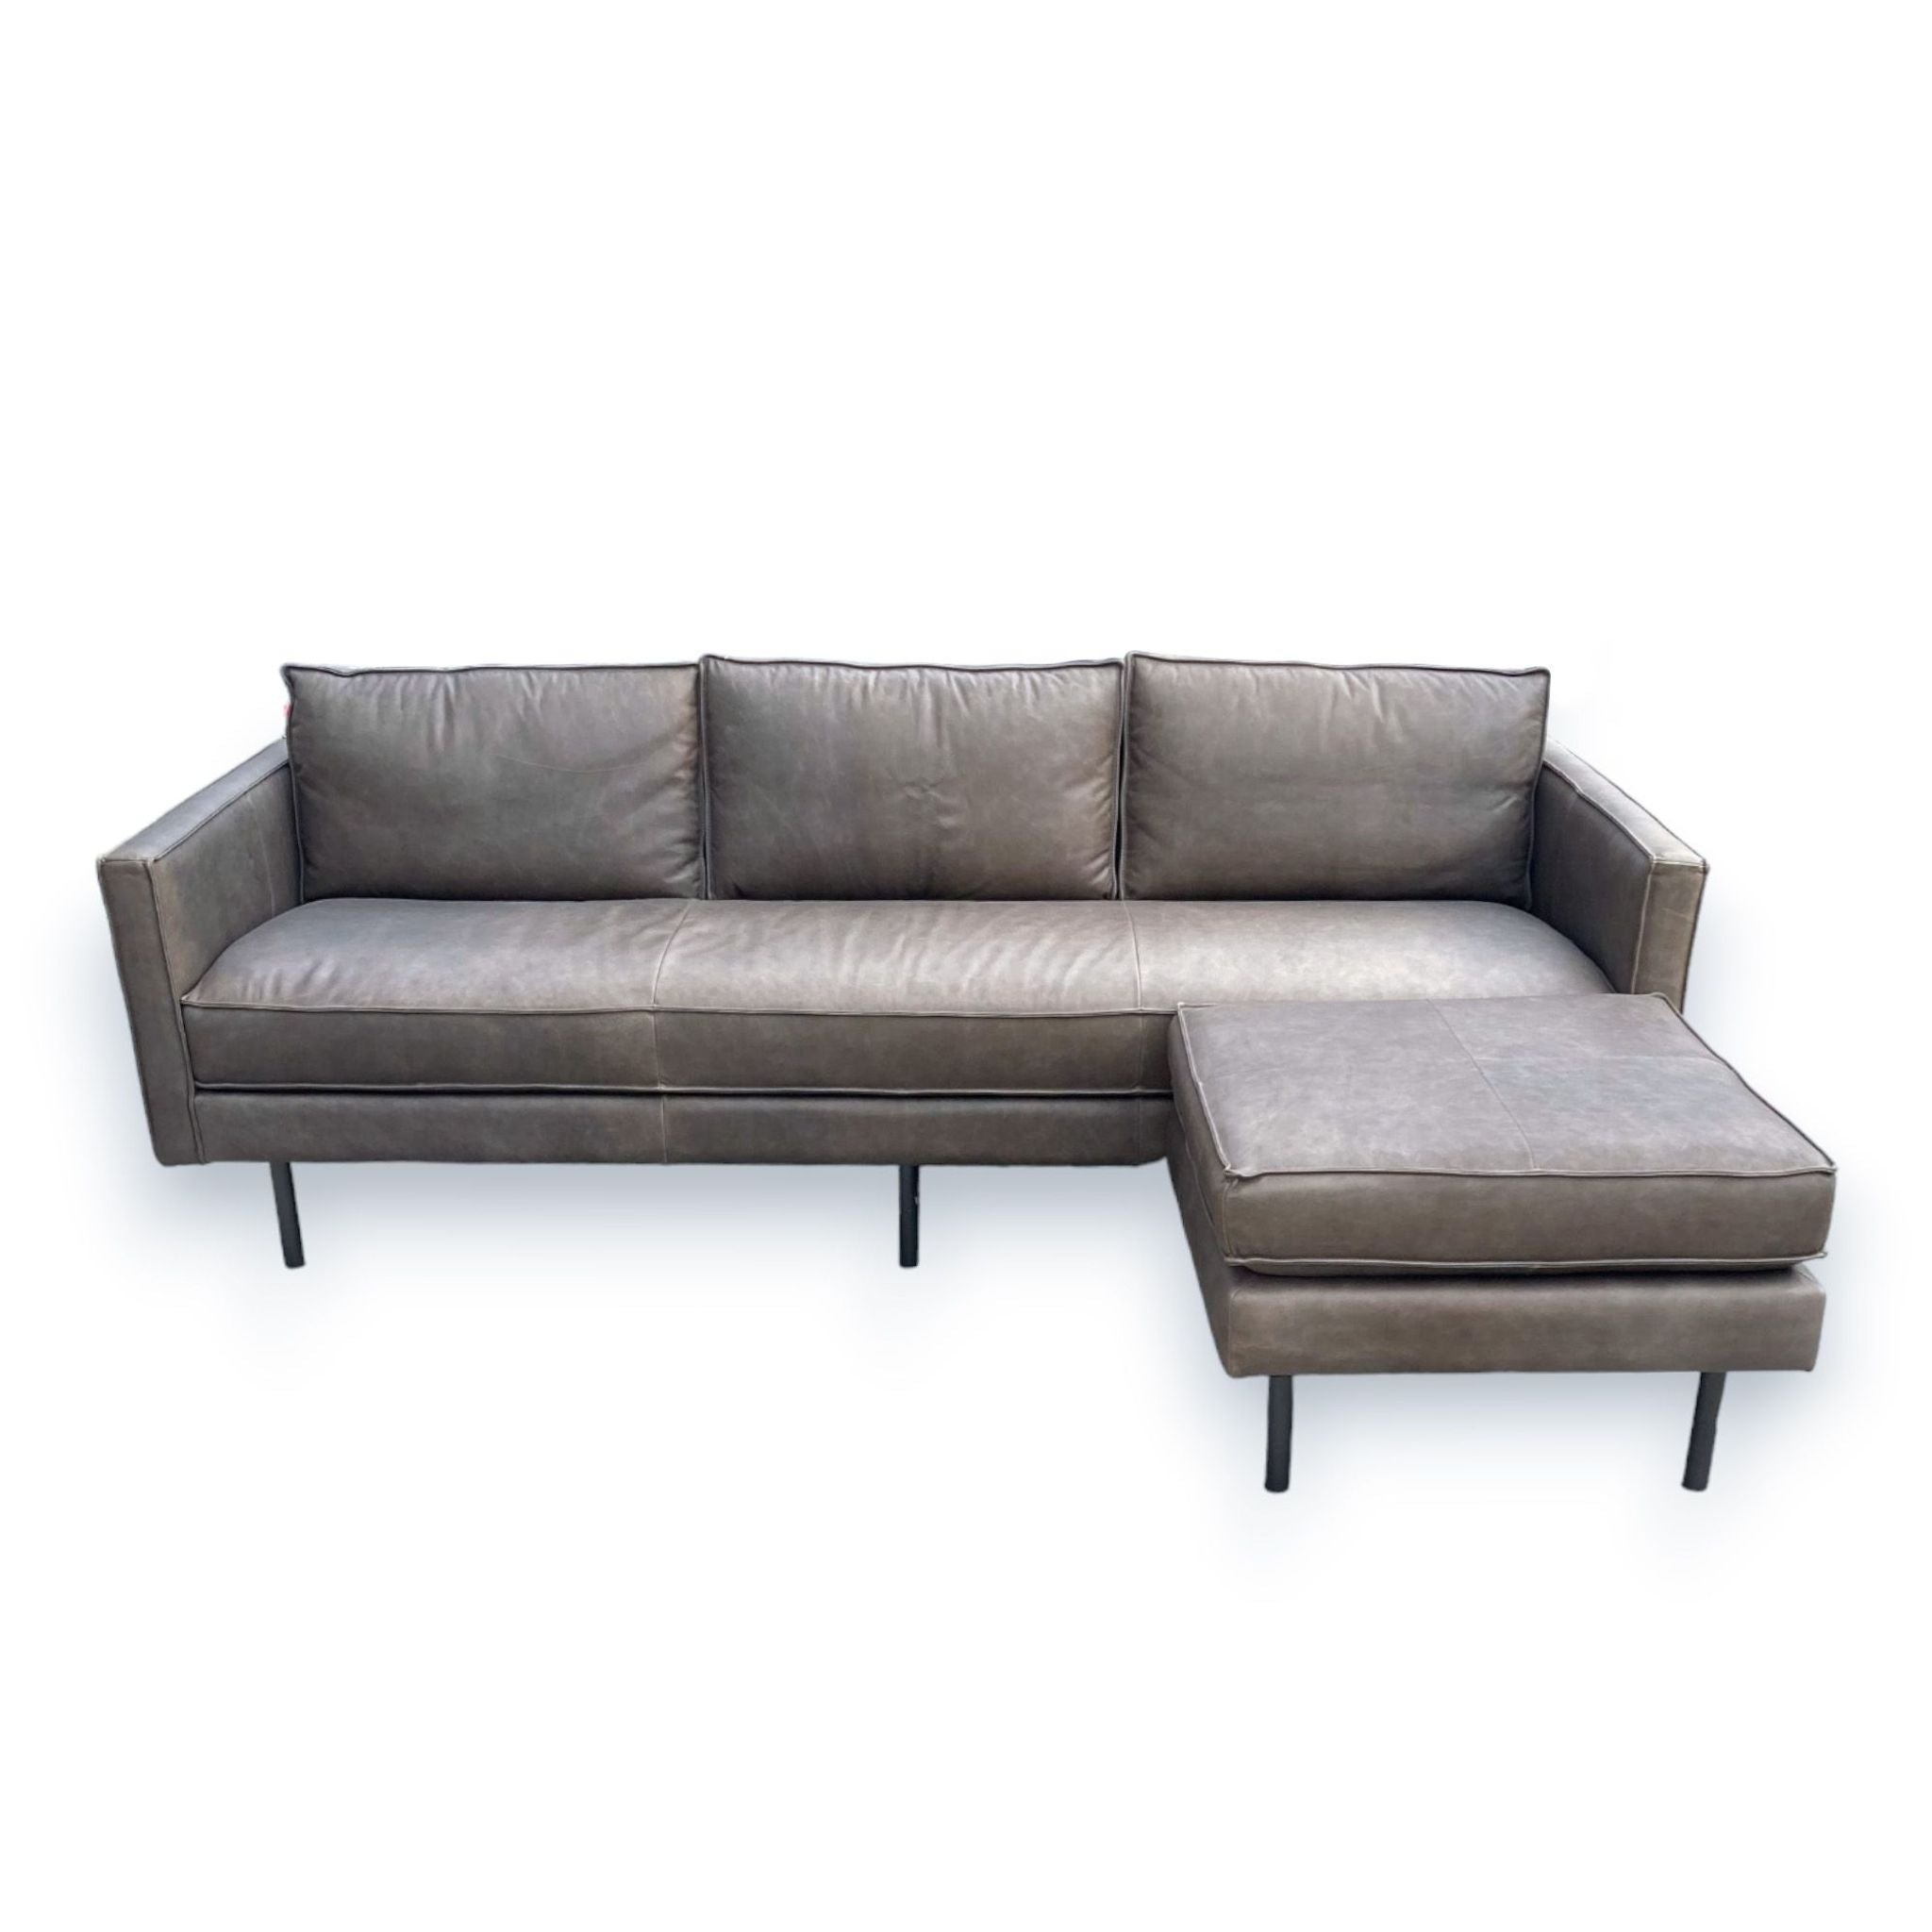 2. Axel Reversible Sectional by West Elm featuring flanged edges and a movable ottoman positioned as a chaise, in a leather finish.